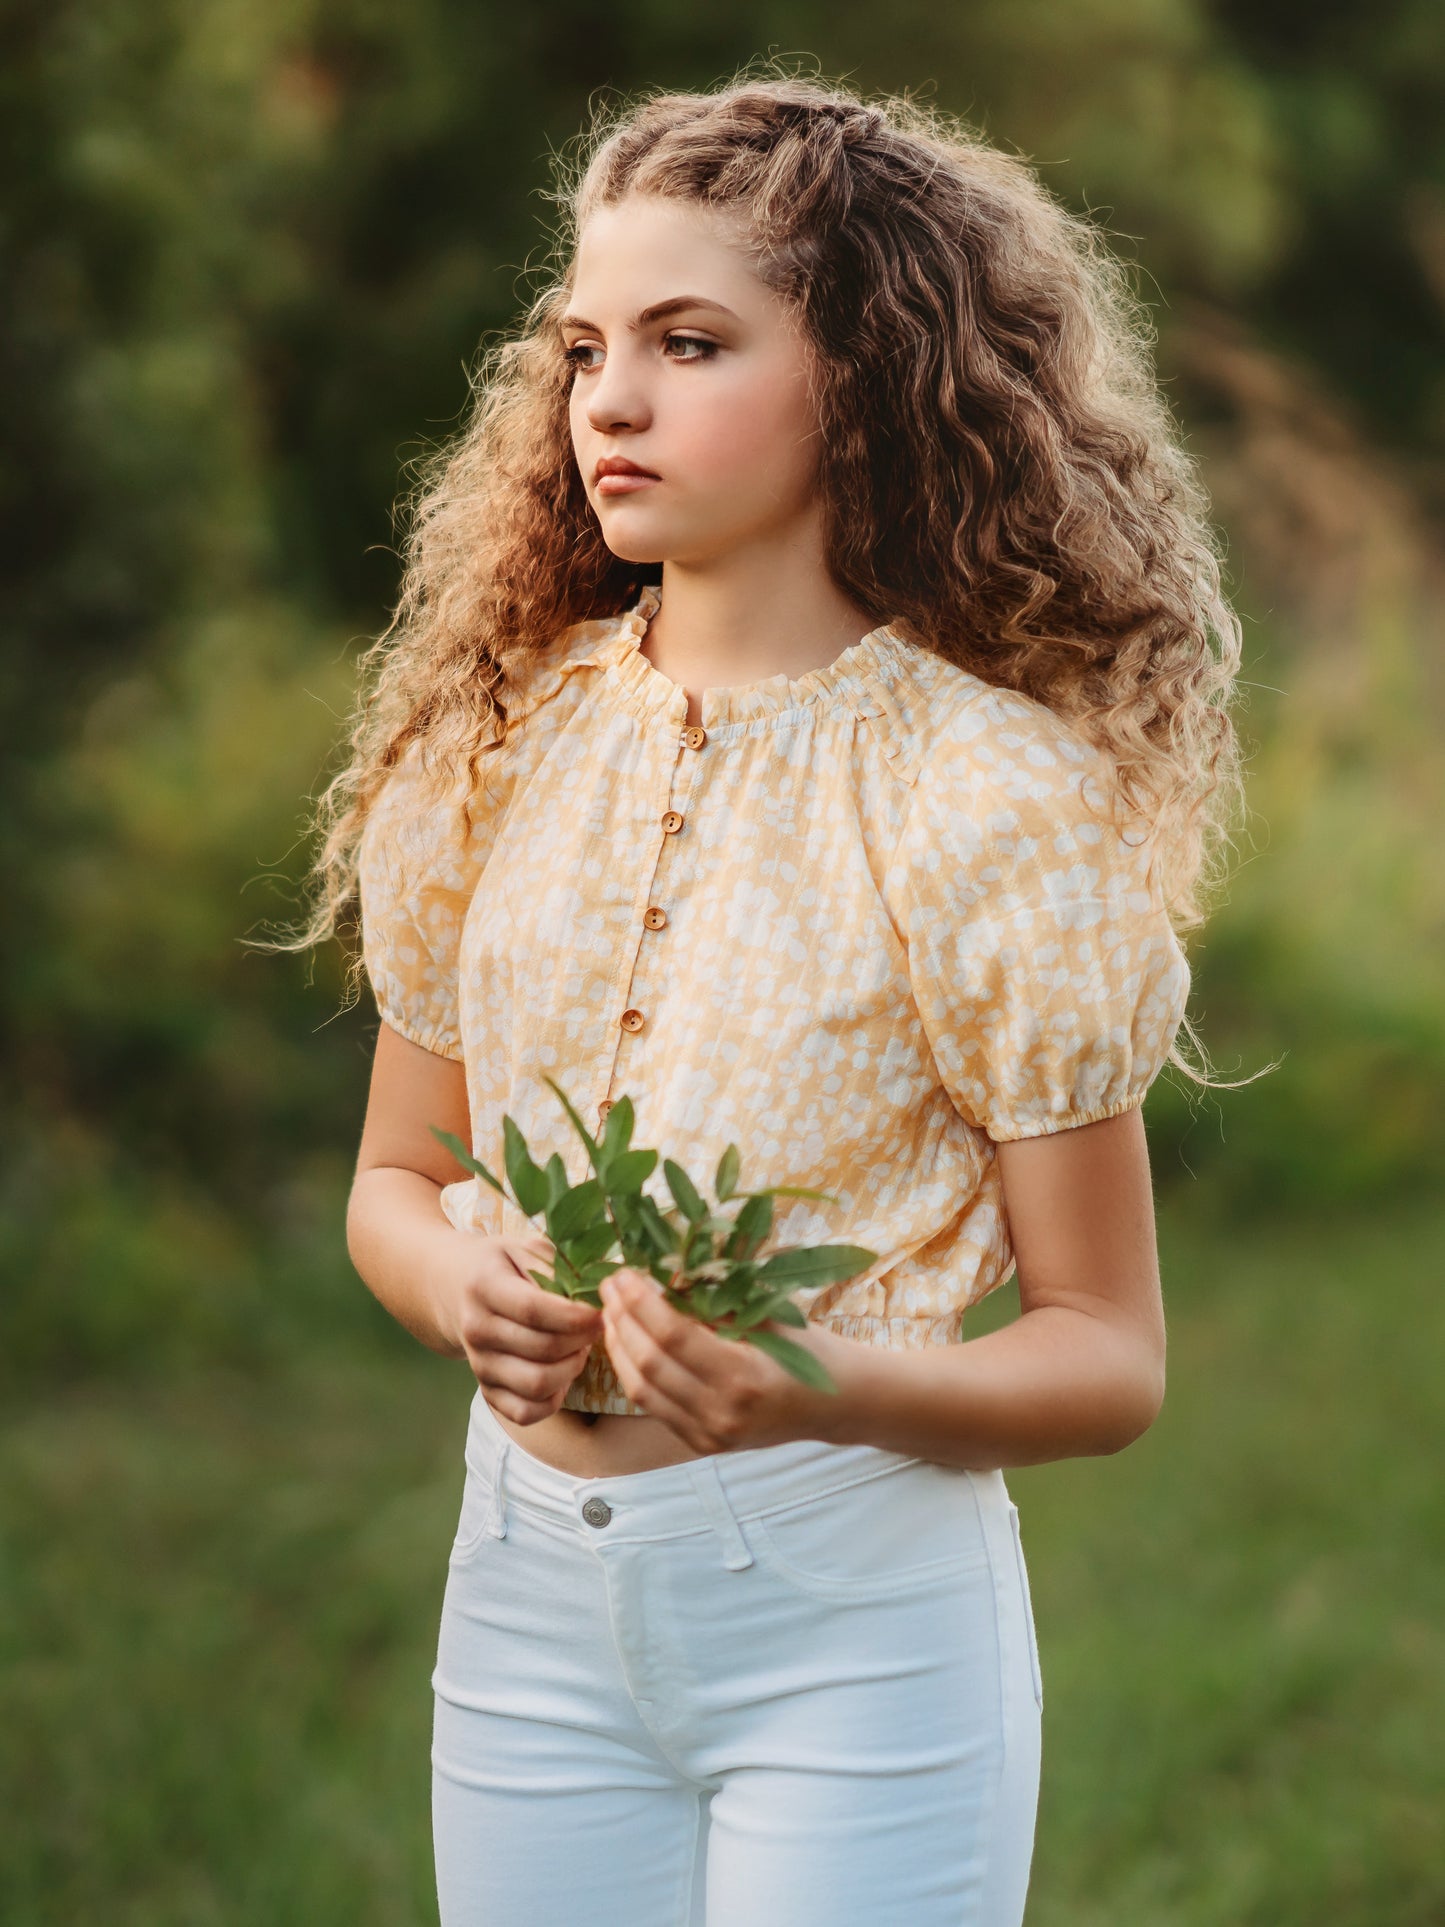 This image of a girl features the product Classic Button Top - I’ve Got Sunshine. This top has functional buttons down the bodice, puff sleeves, and elastic ruffle neckline. It is a pattern of white flowers on a bright yellow background.